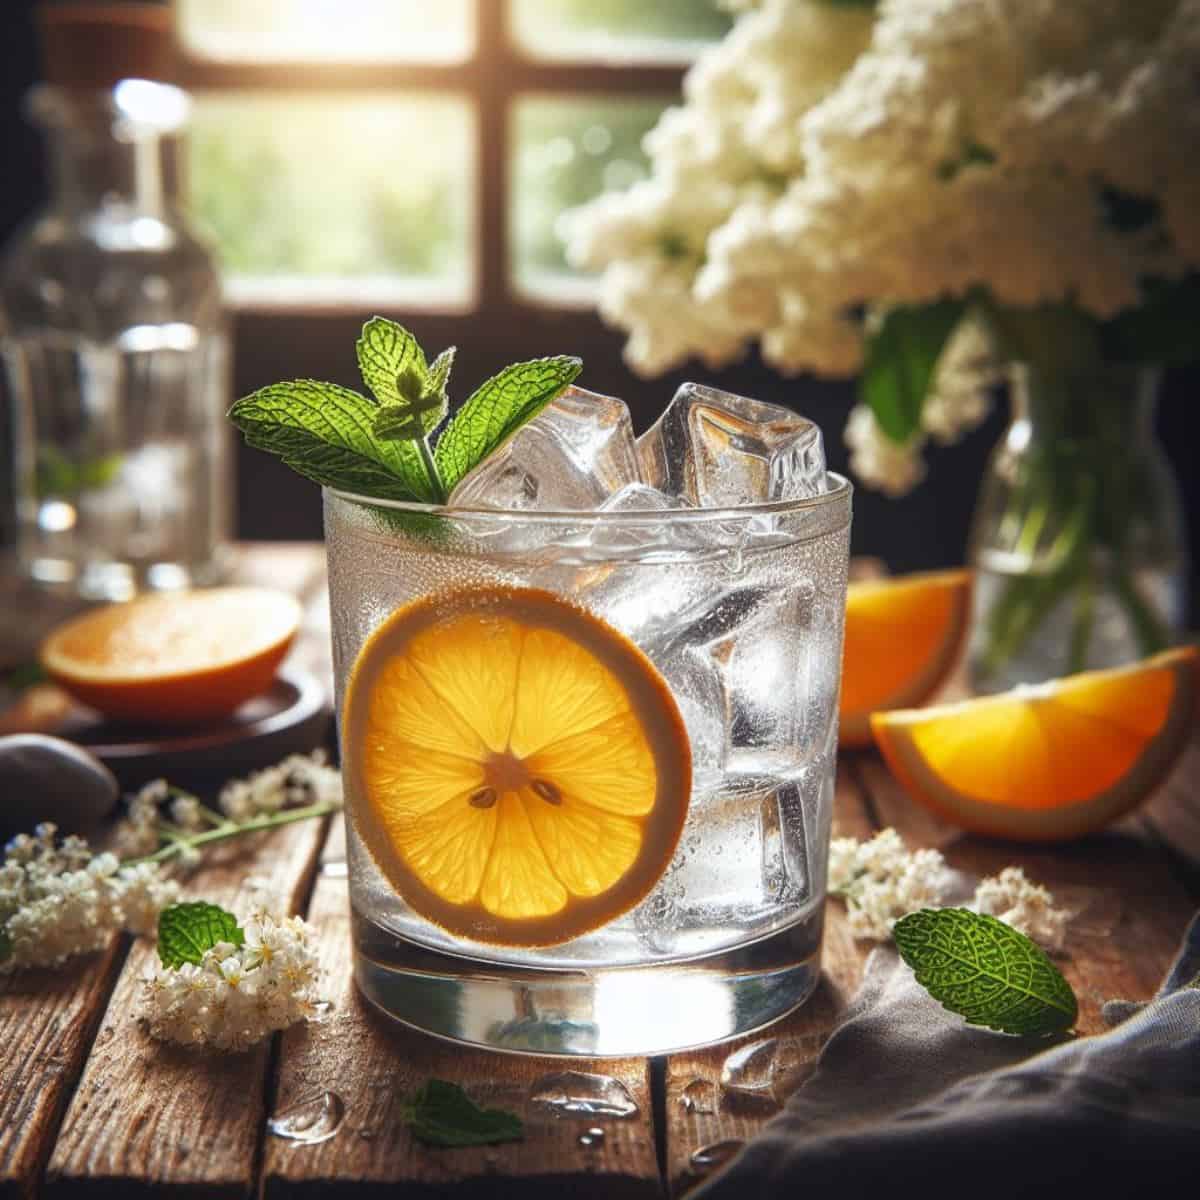 a cocktail with Lillet Blanc, orange slice and mint leaves, with flowers in the background